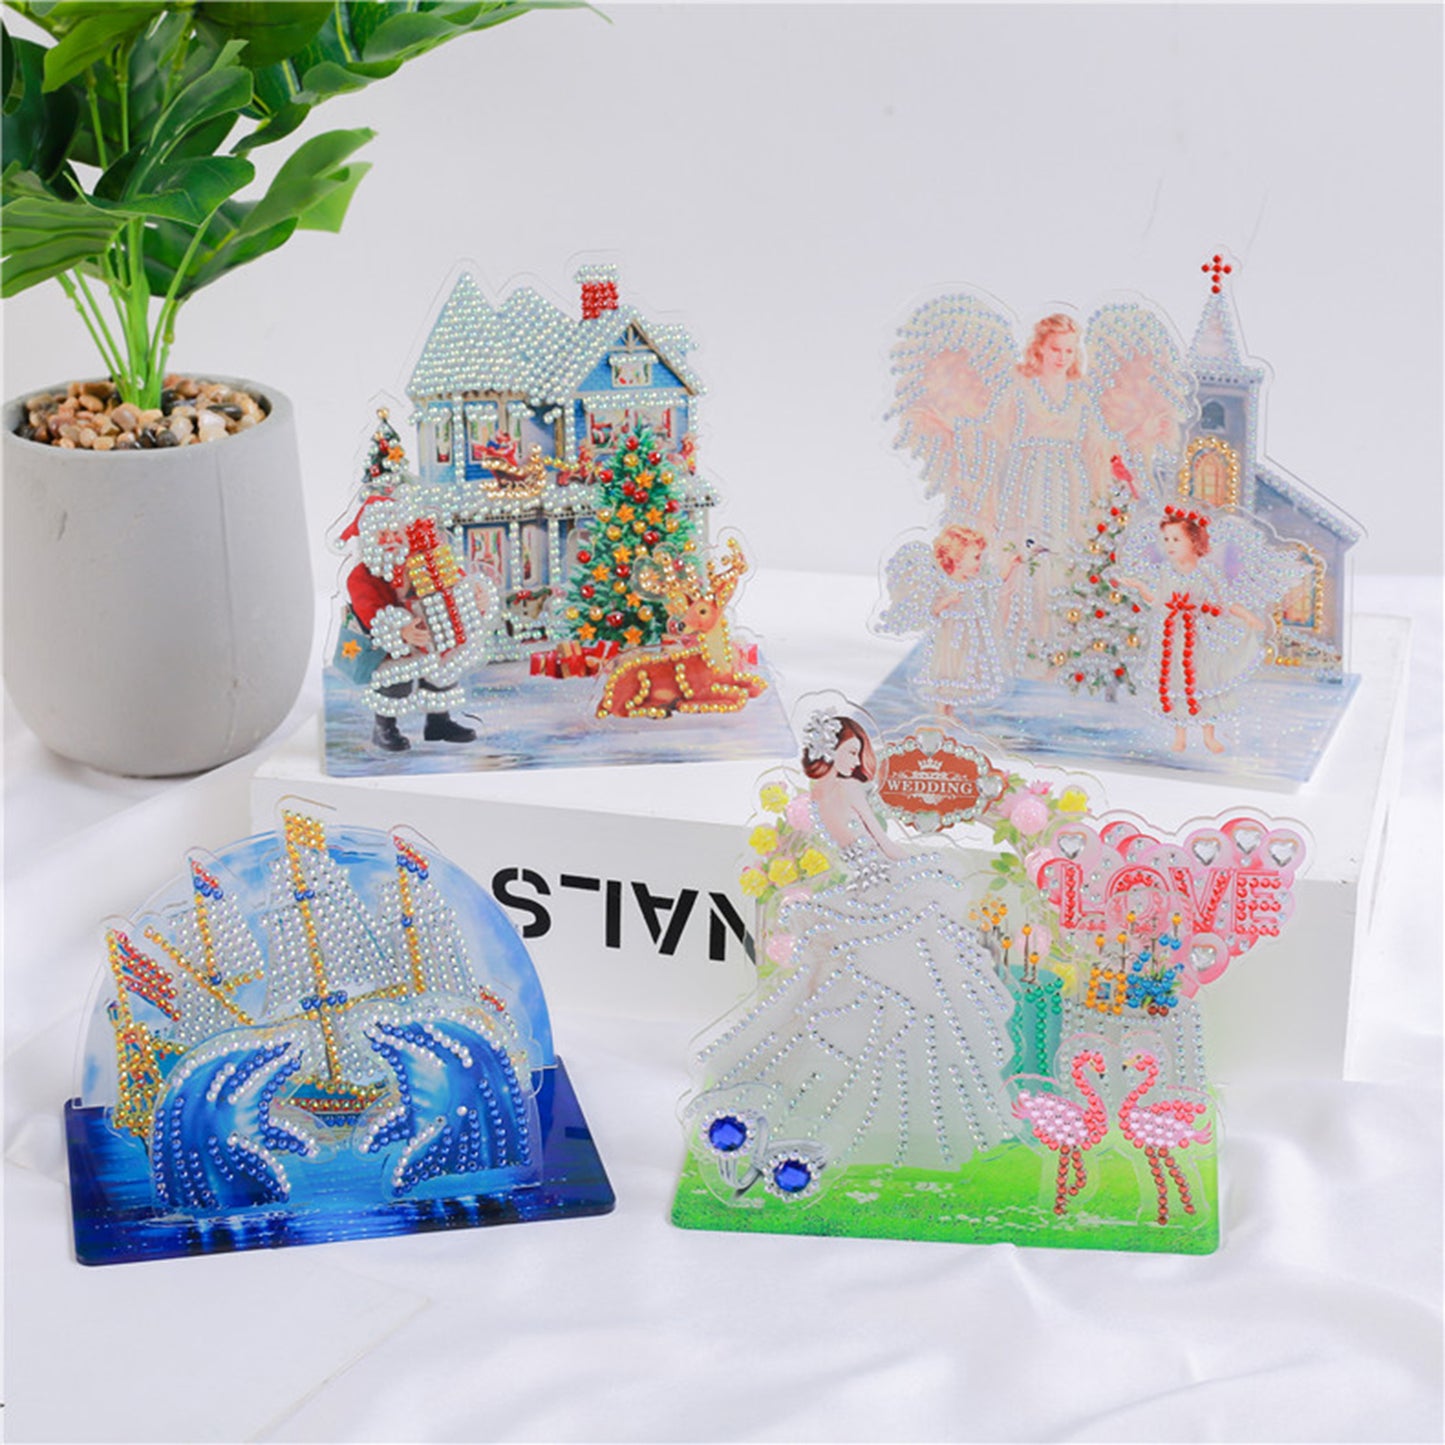 5D Diamond Painting Kits for Children Adult Beginners Table Decor Paint By Number DIY Crafts